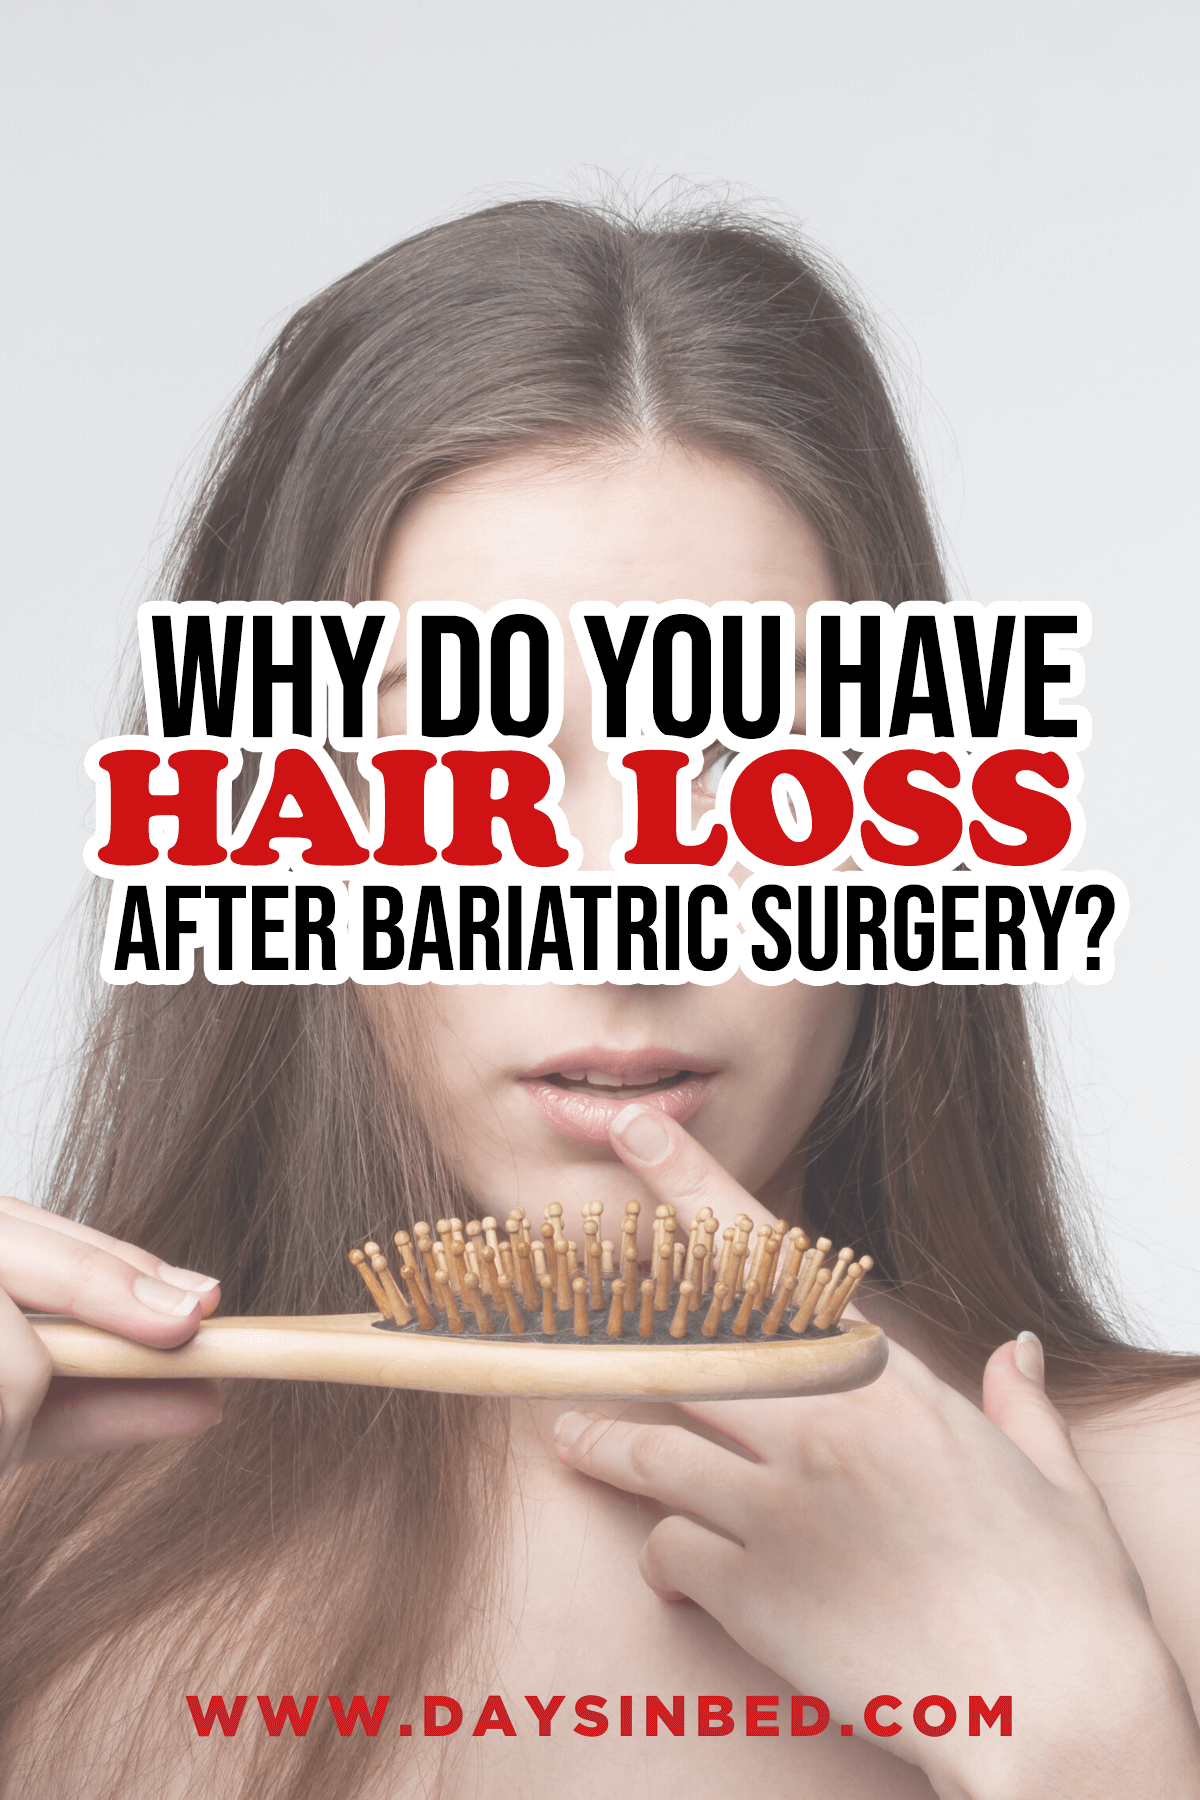 Why do you have hair loss after bariatric surgery?